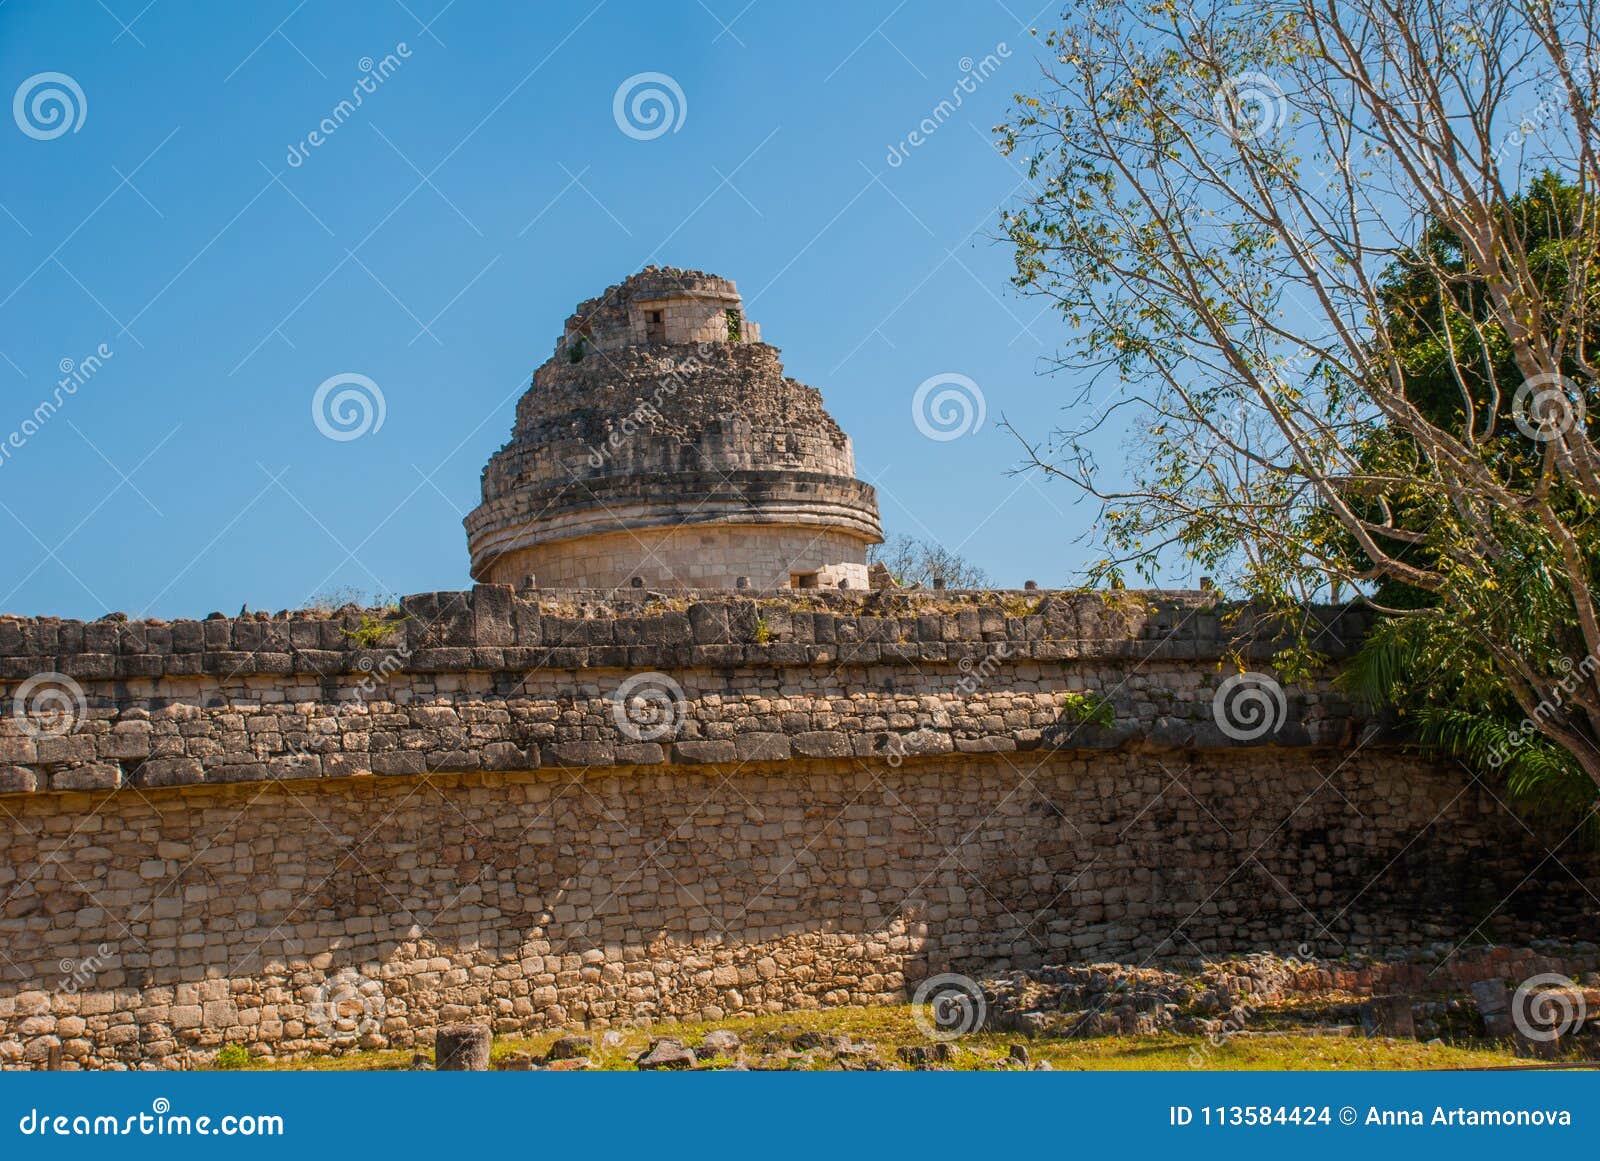 the observatory at chichen itza. mexico